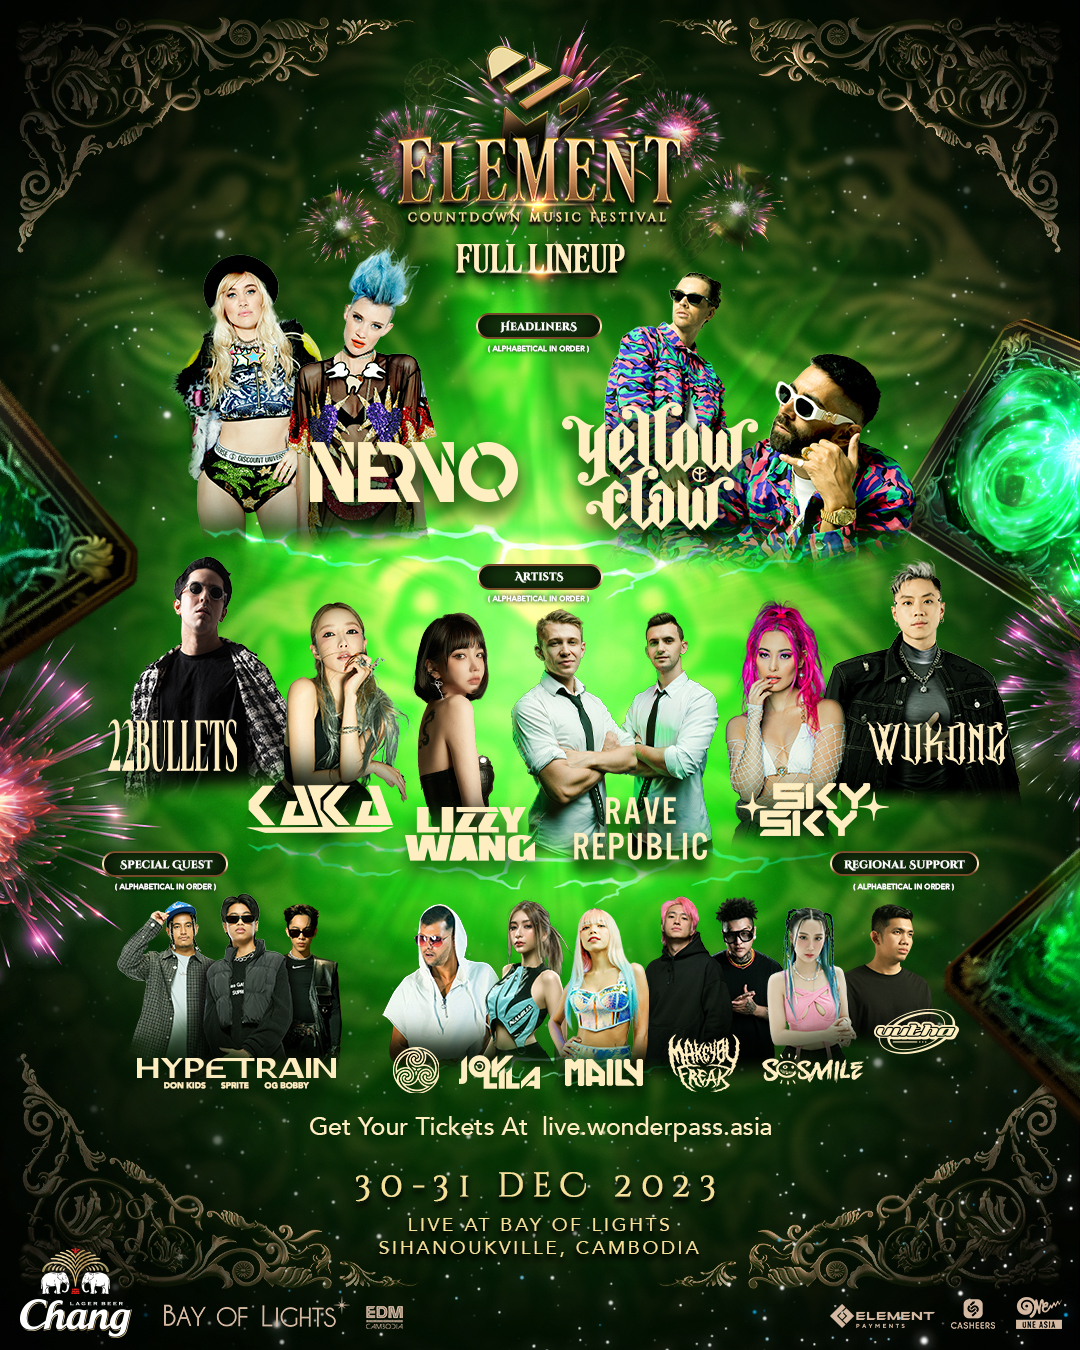 Elements Countdown Music Festival Lineup